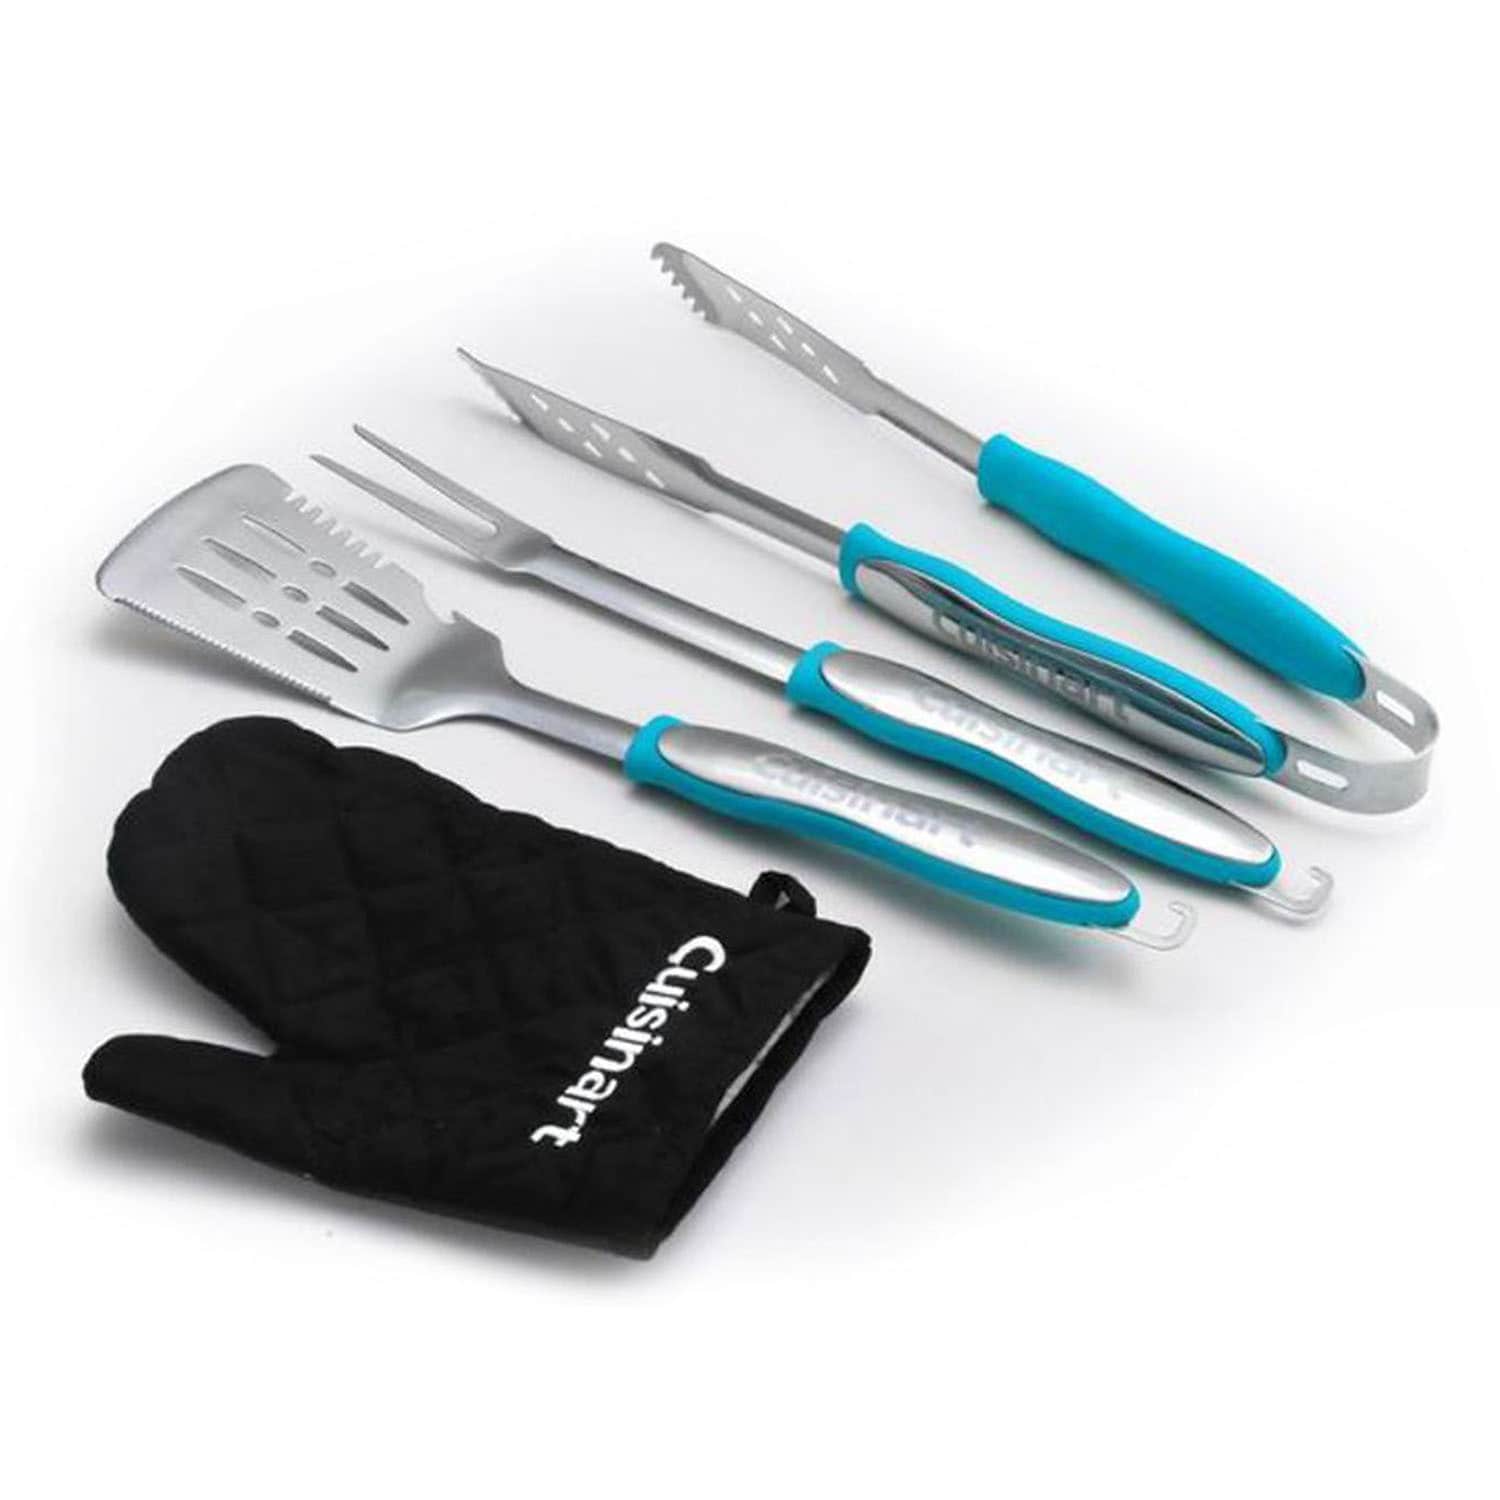 Cuisinart CGS-134 3-Piece Grilling Tool Set with Grill Glove - image 2 of 2